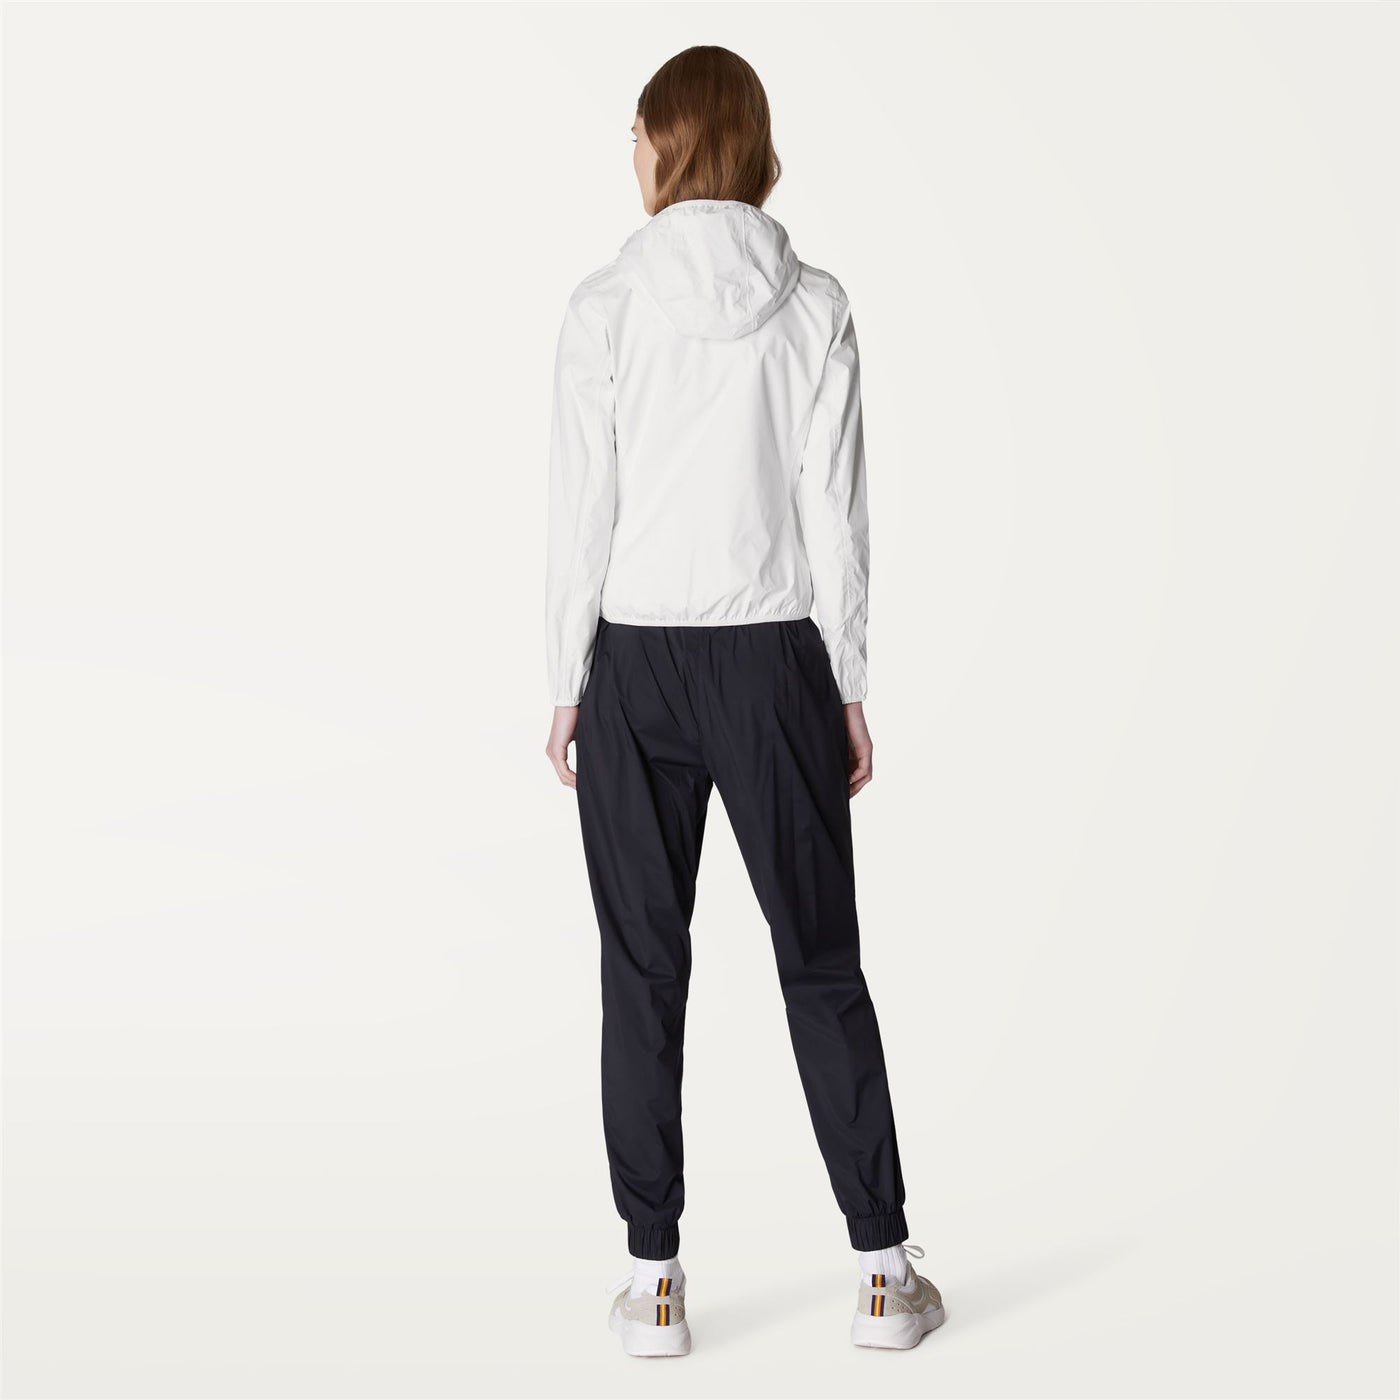 Jackets Woman LILY PLUS.2 DOUBLE Short WHITE - BEIGE | kway Dressed Front Double		